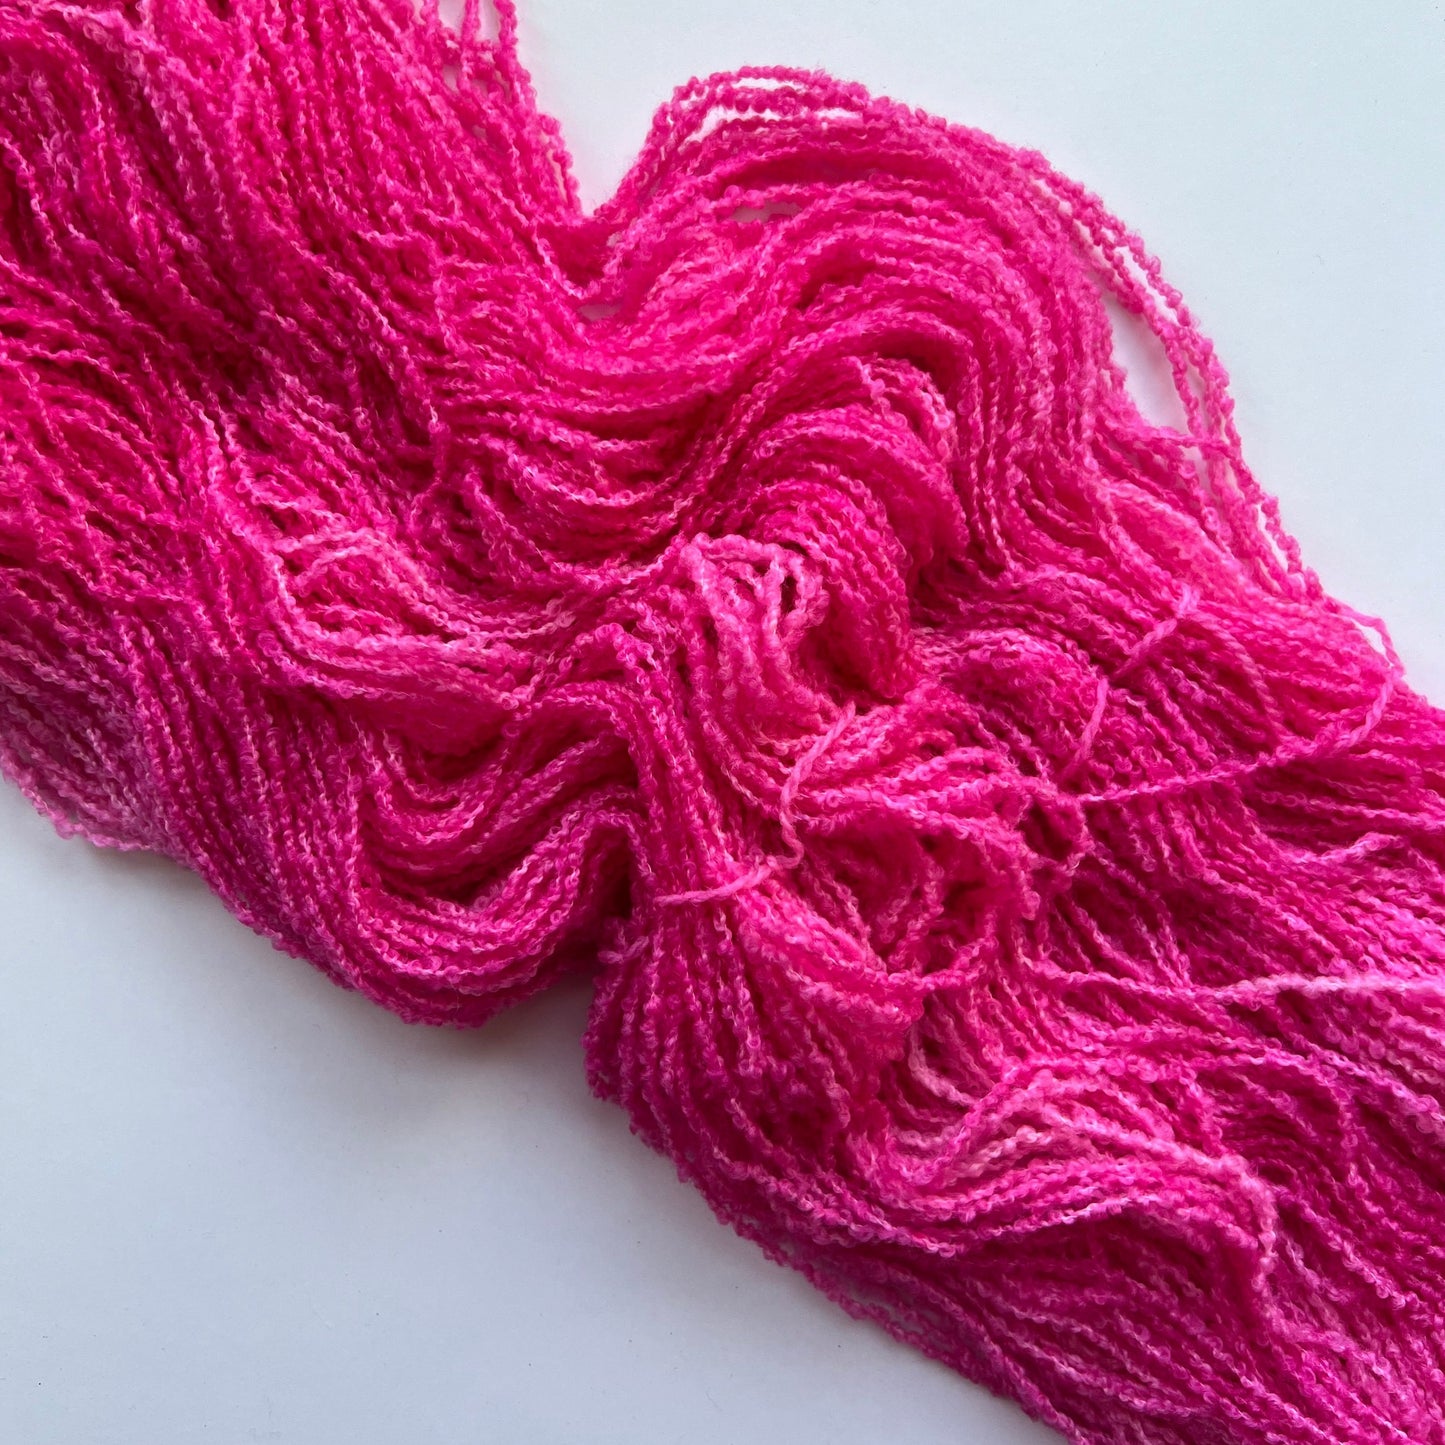 Summer Camp Fibers Hand Dyed Boucle DK  - Mystic Orchid